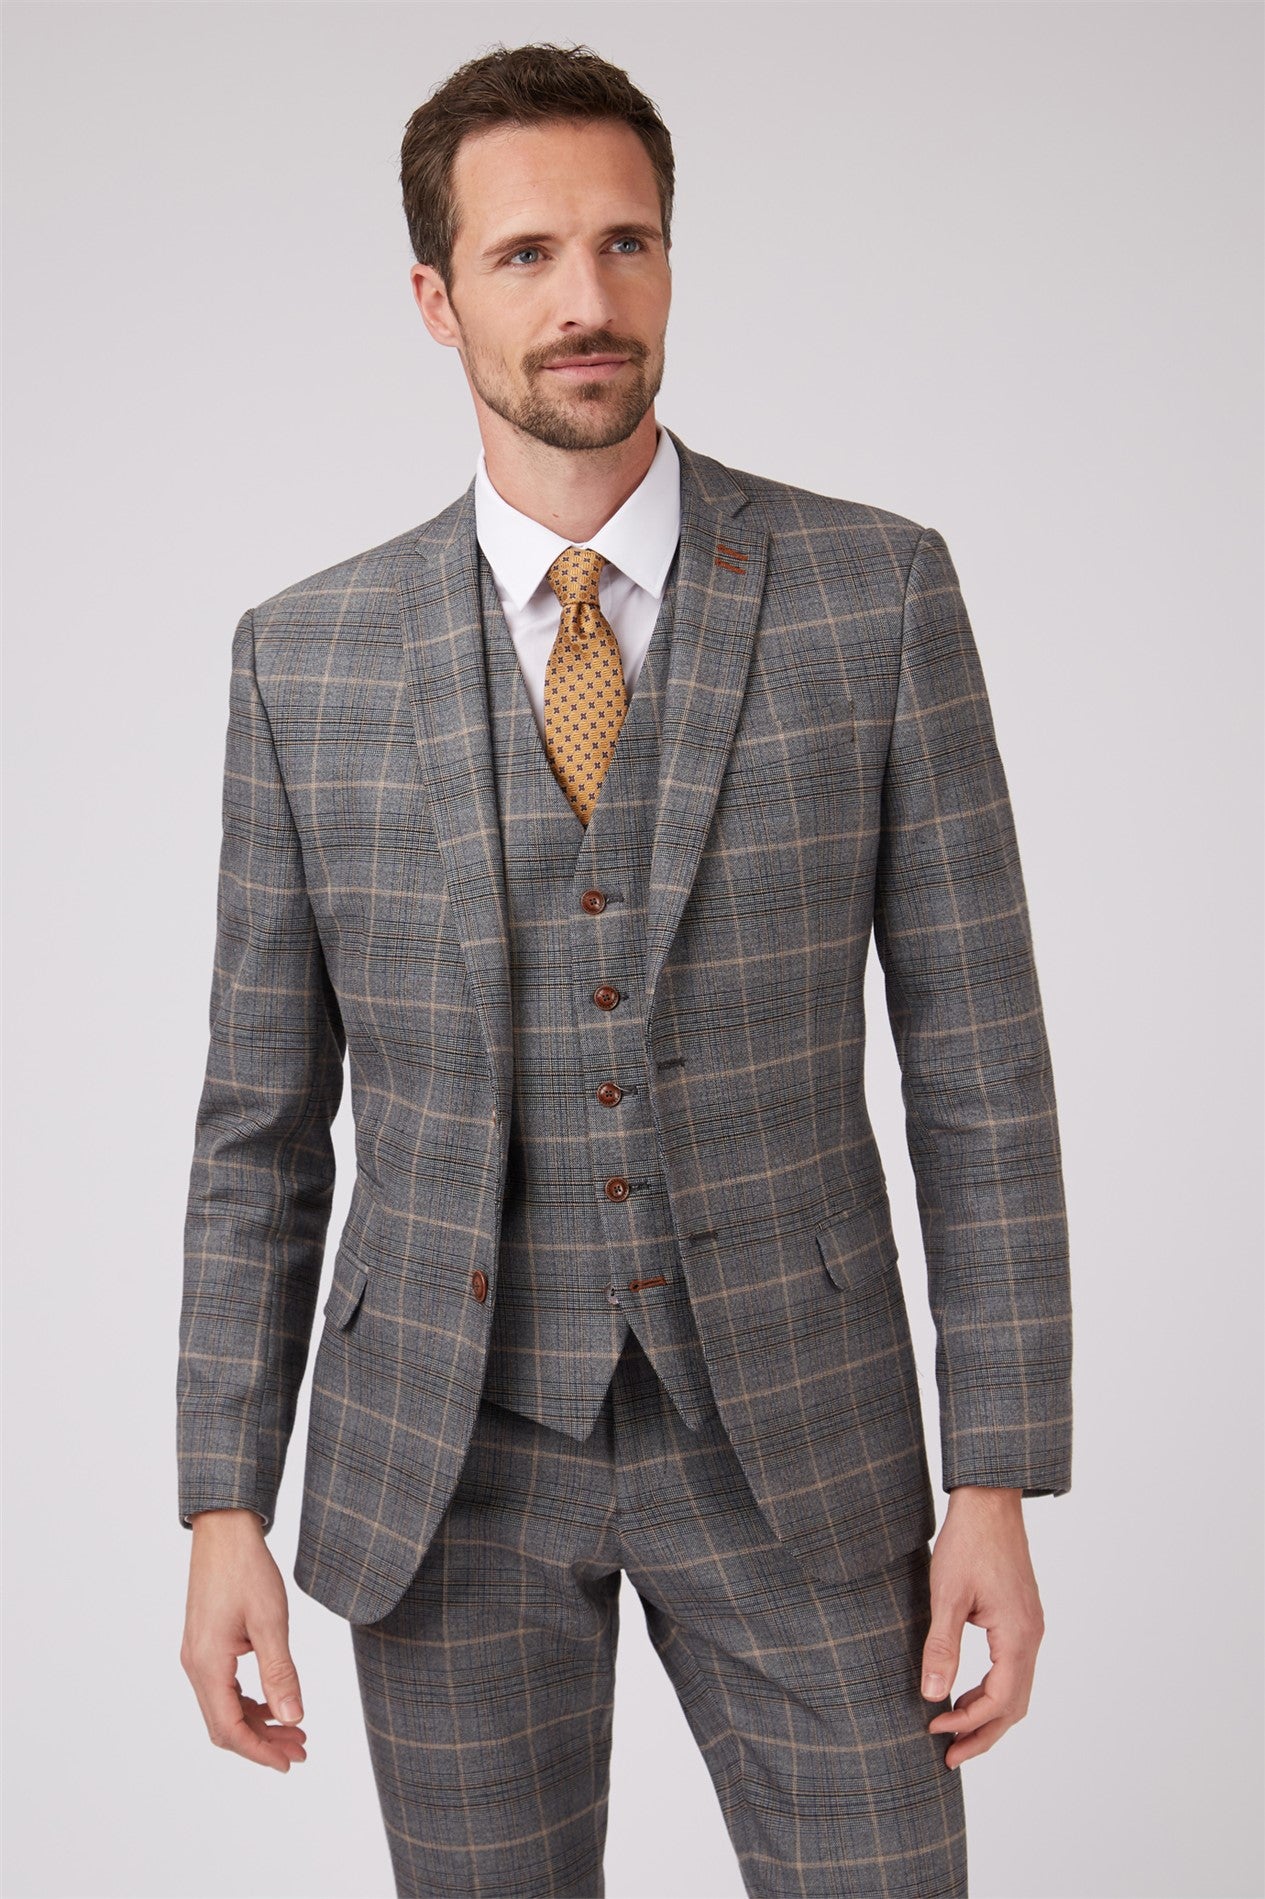 Grey and Tan Over Check Suit from Antique Rogue - Jacket